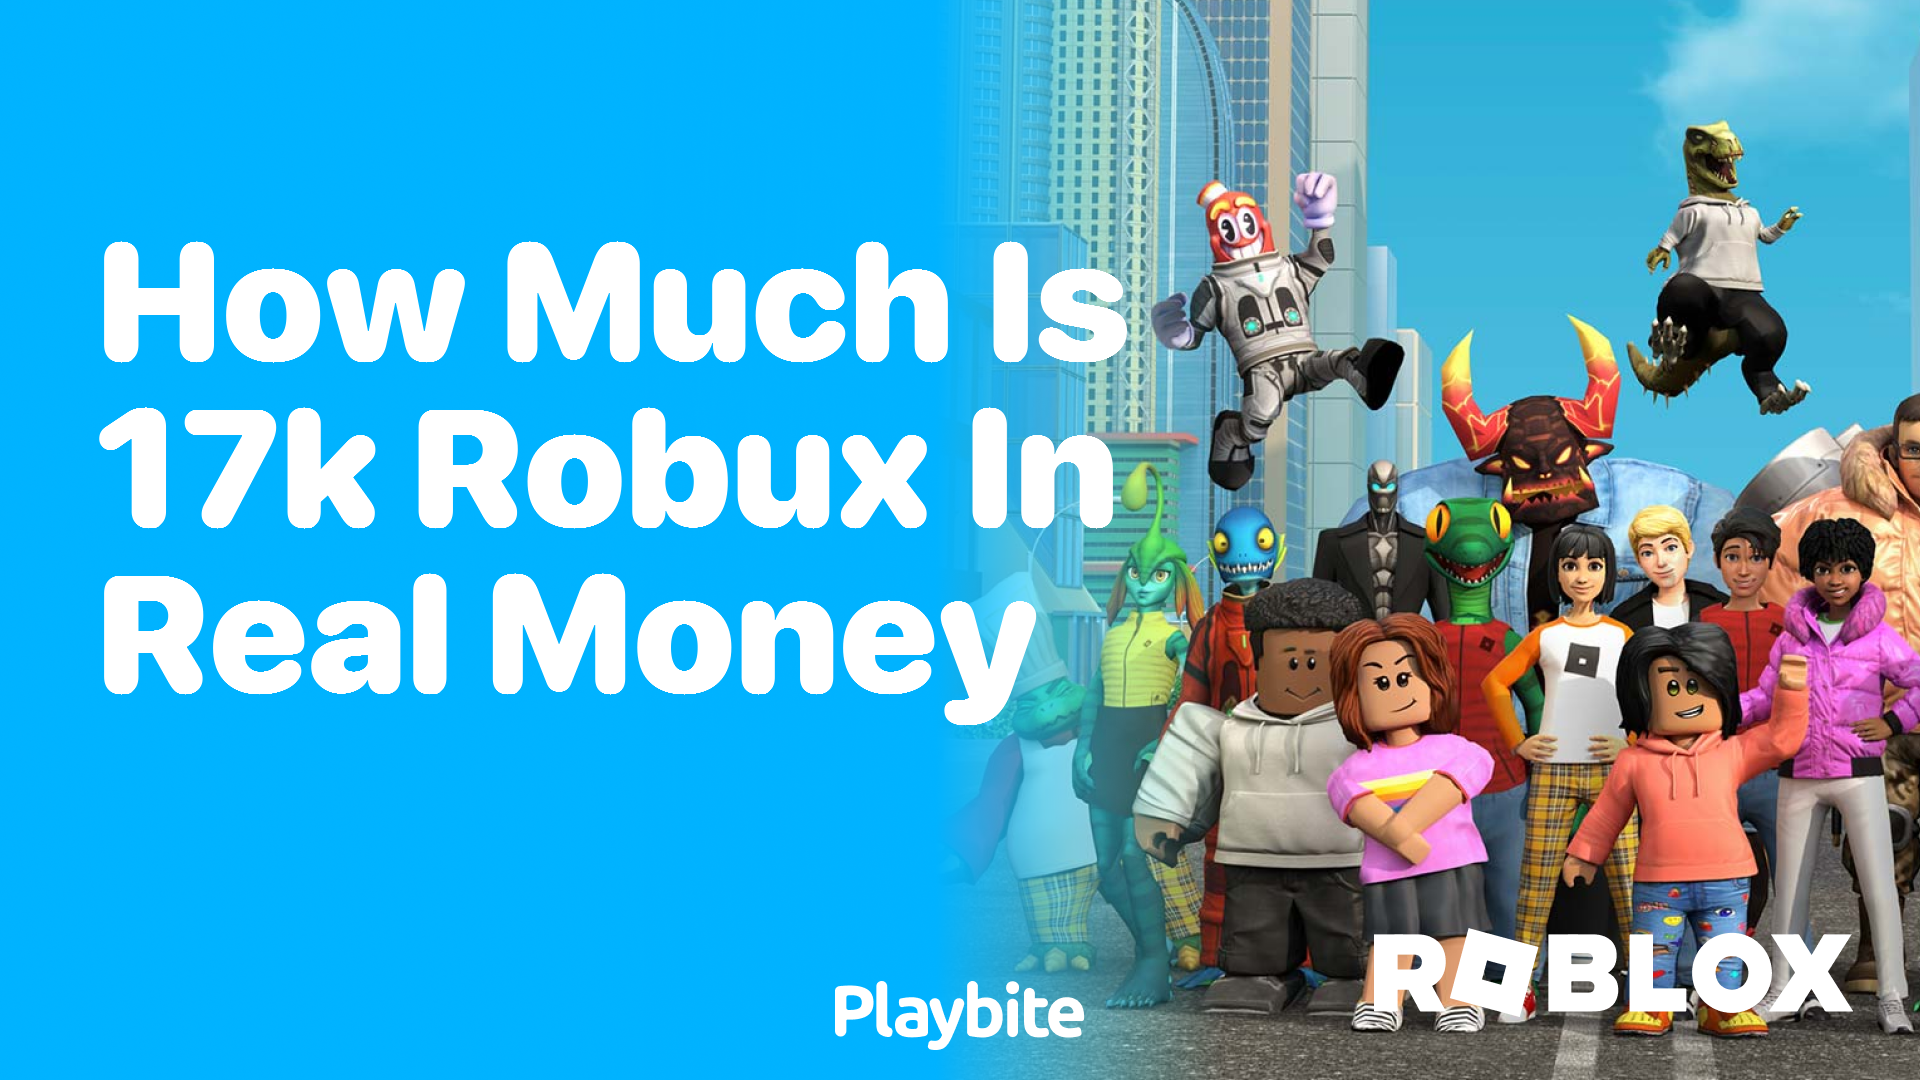 How Much Is 17k Robux in Real Money?